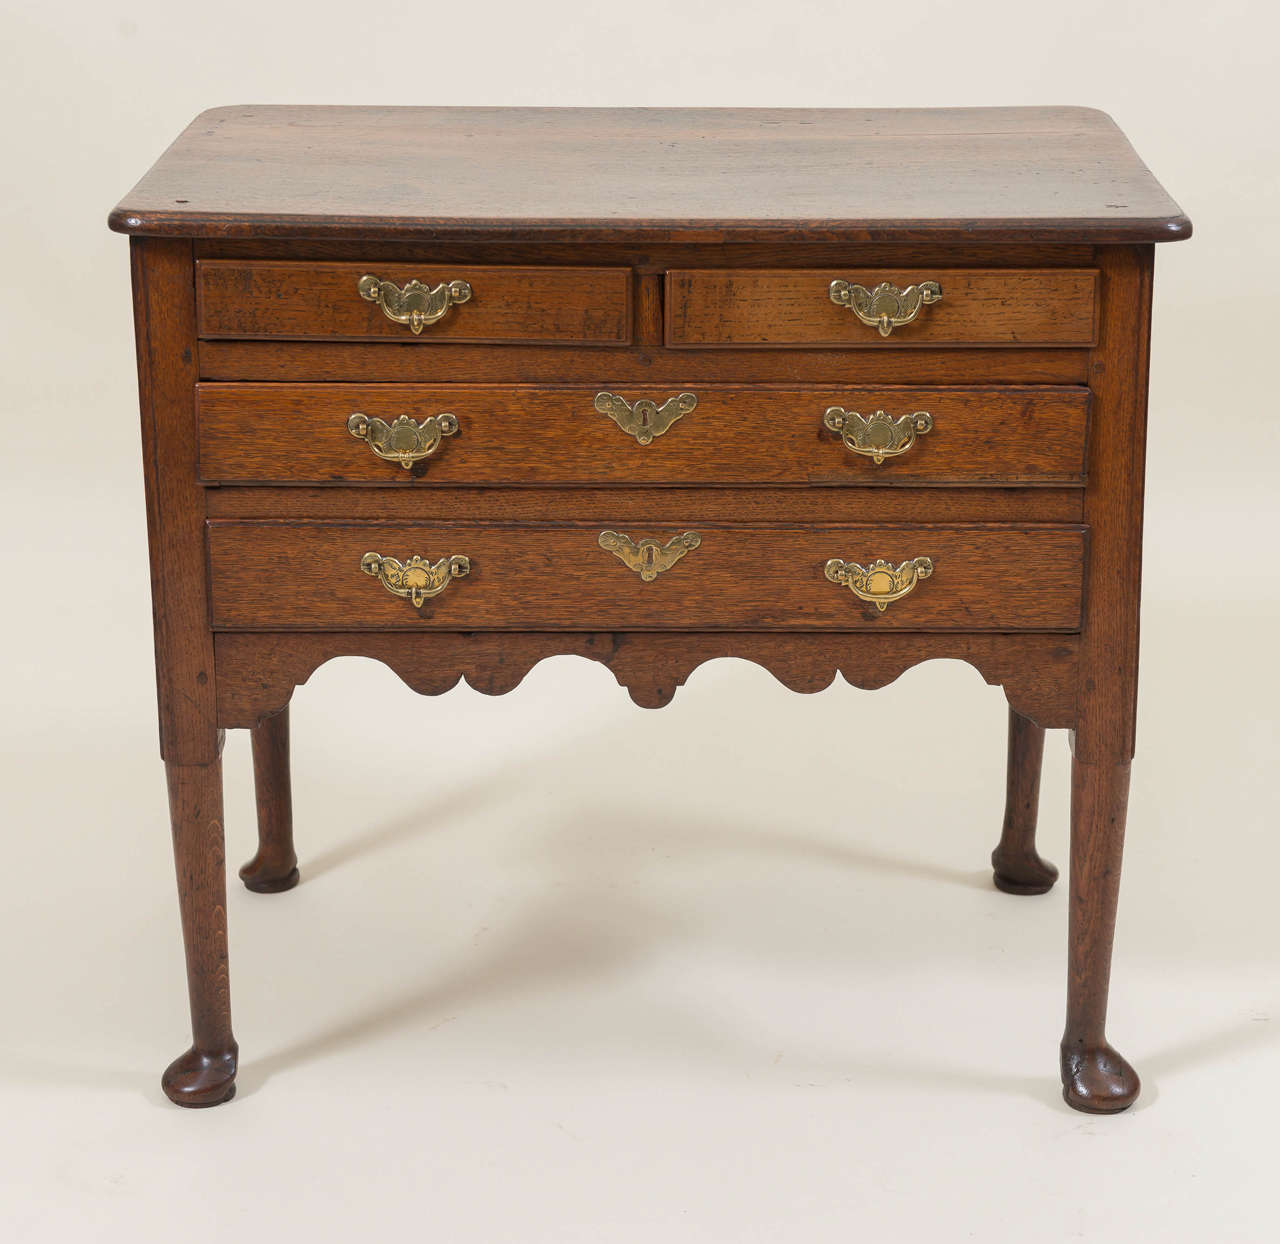 18th century Georgian Lowboy chest fitted with four drawers. Good proportions to the small-scale with modified cabriole legs and pad feet. Old hardware with good details, circa 1760.